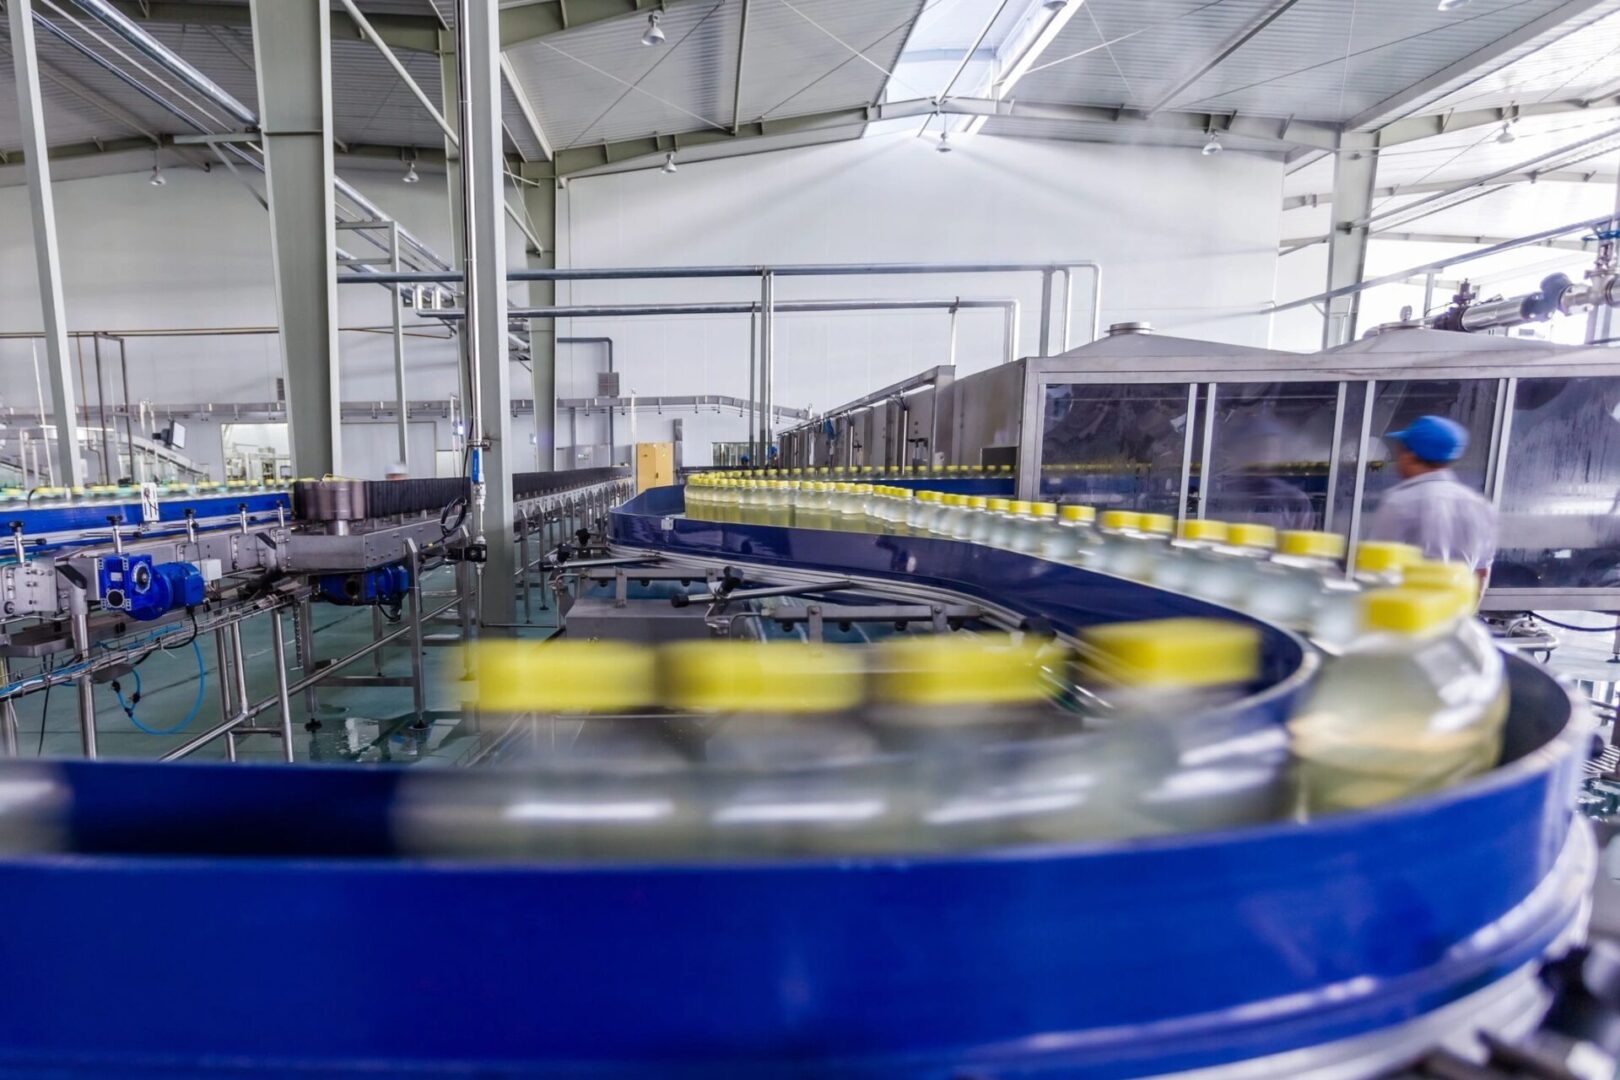 A conveyor belt with many cans of beer on it.